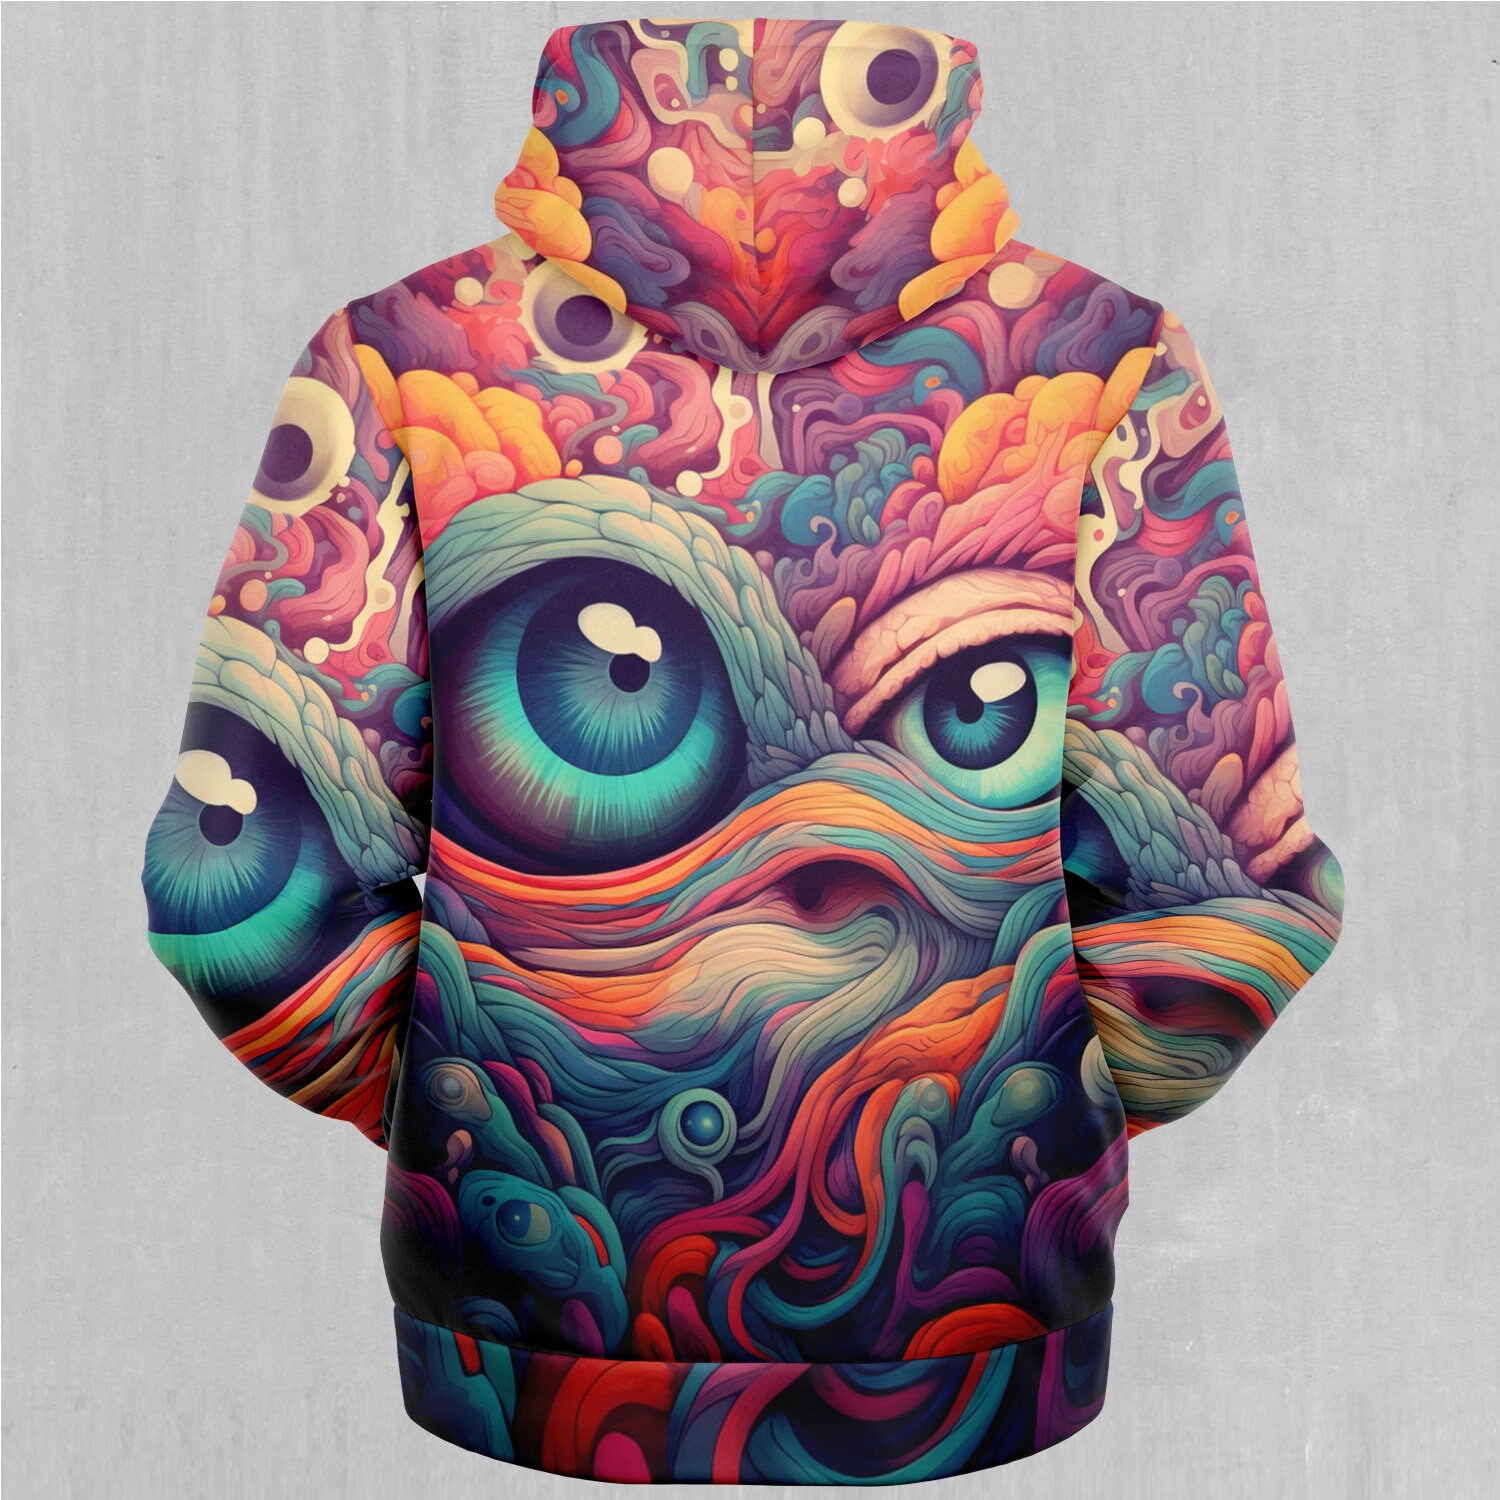 Discover Mind Iris Psychedelic Abstract Trippy Mandala Sherpa Microfleece Zip-Up Hoodie